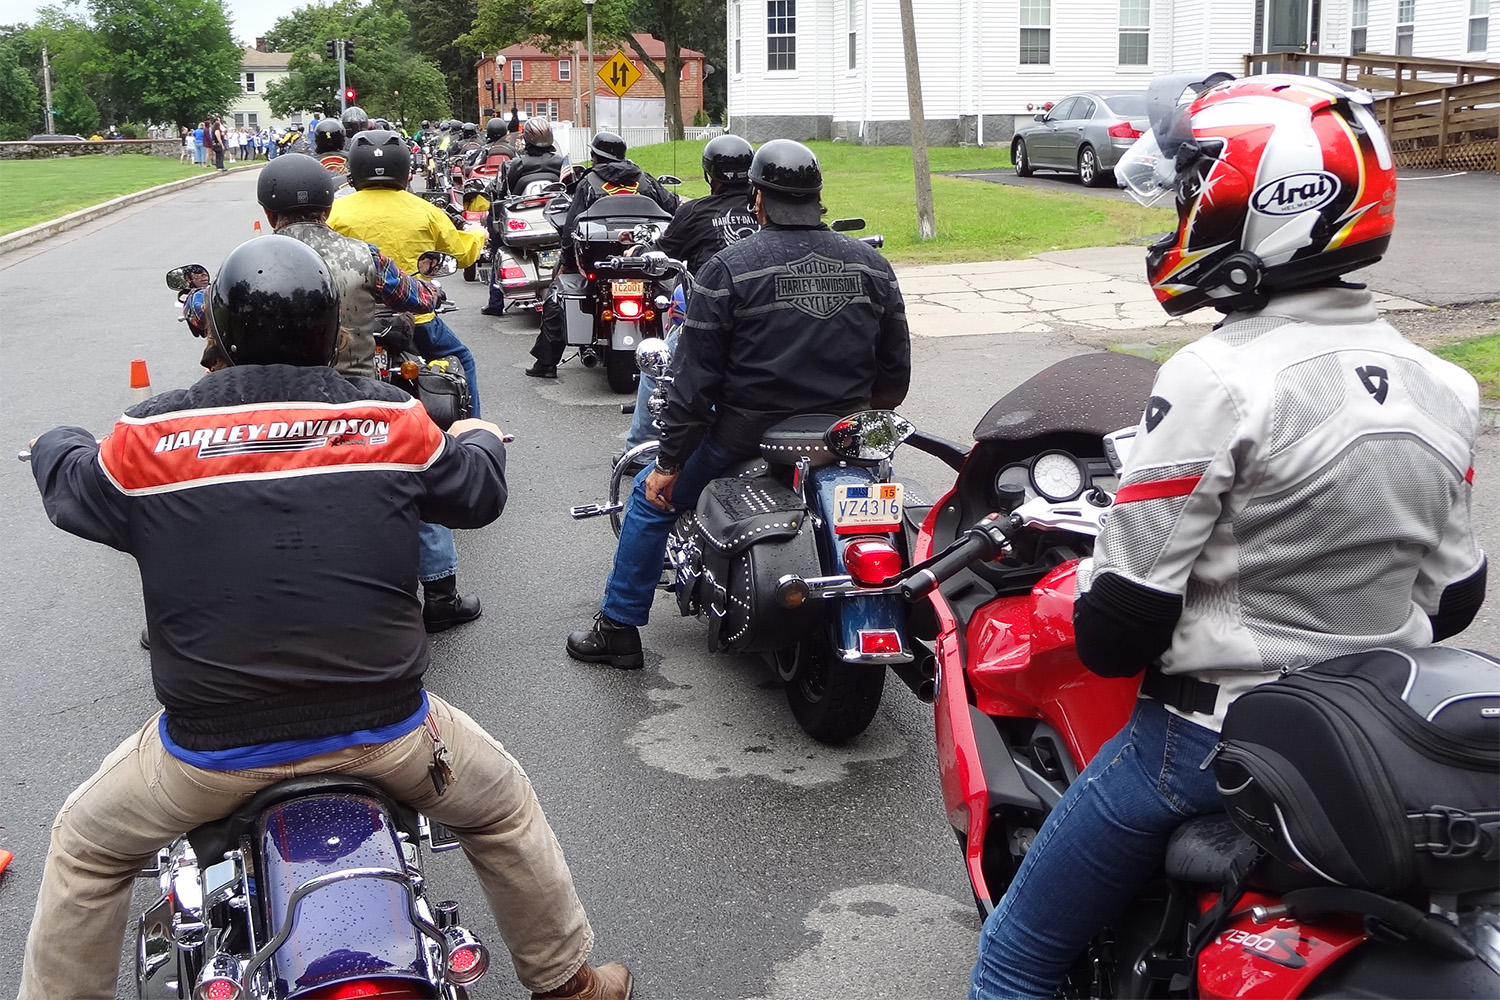 Biker lineup, ready to ride off 